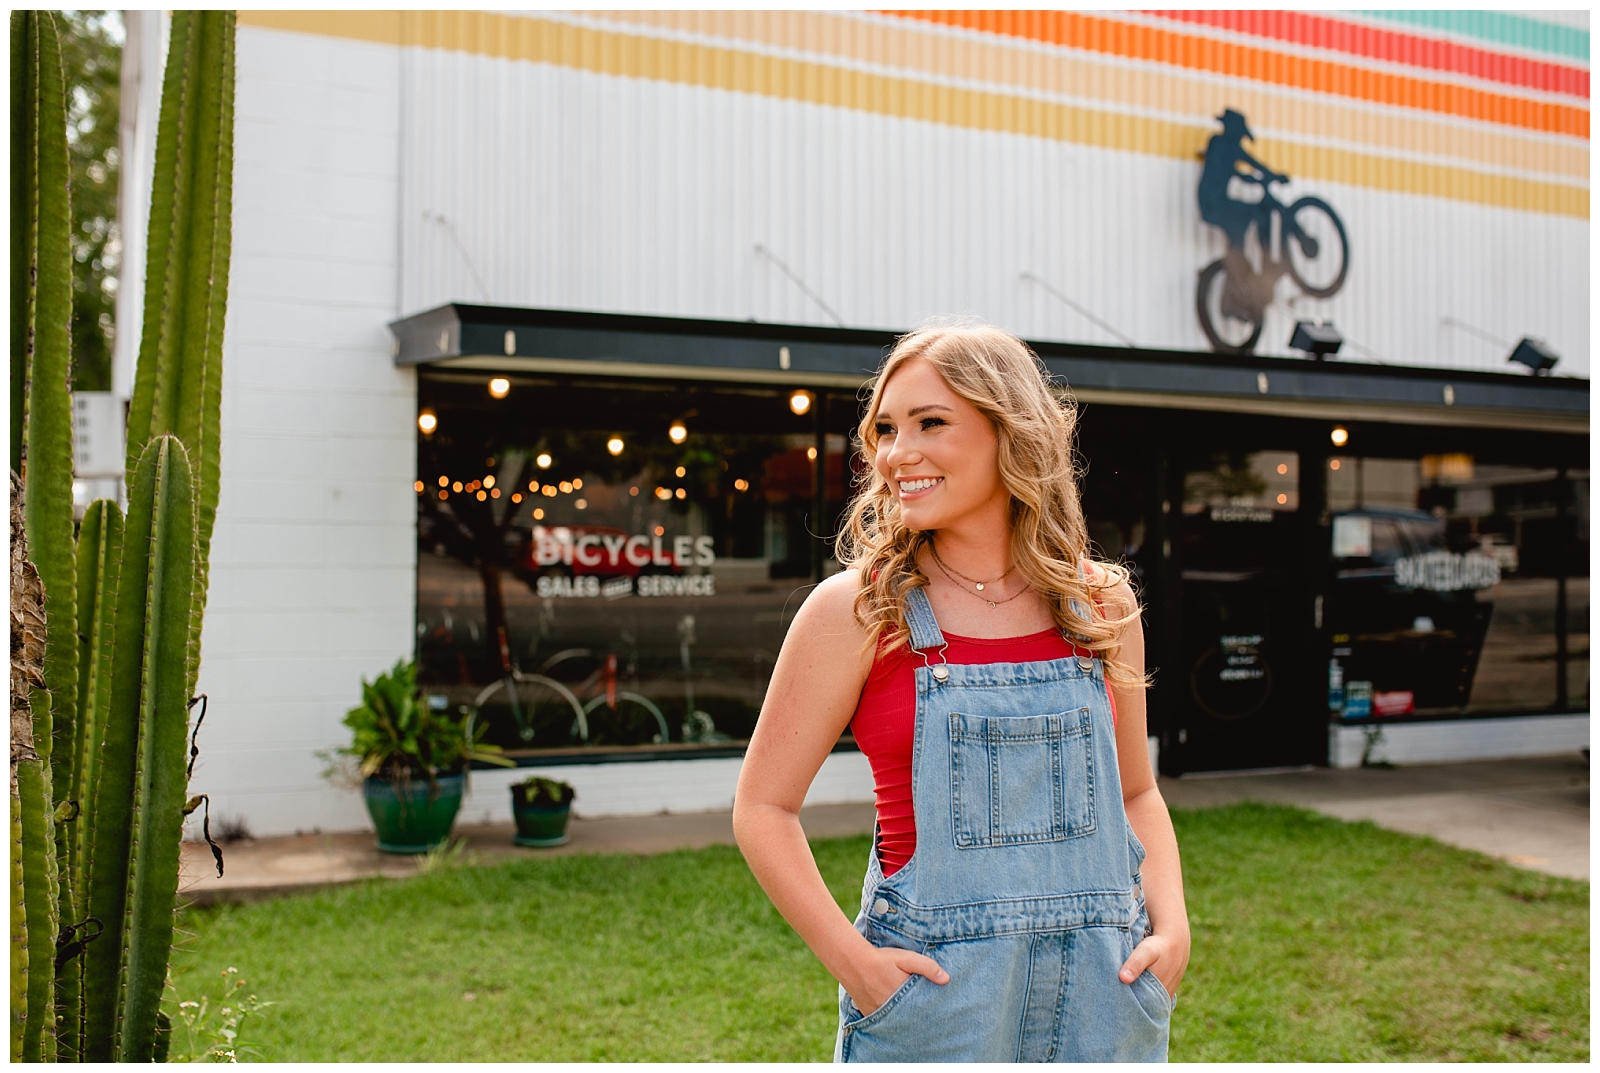 Fun, colorful photos for senior year in front of Bike Shop with girl in overalls.